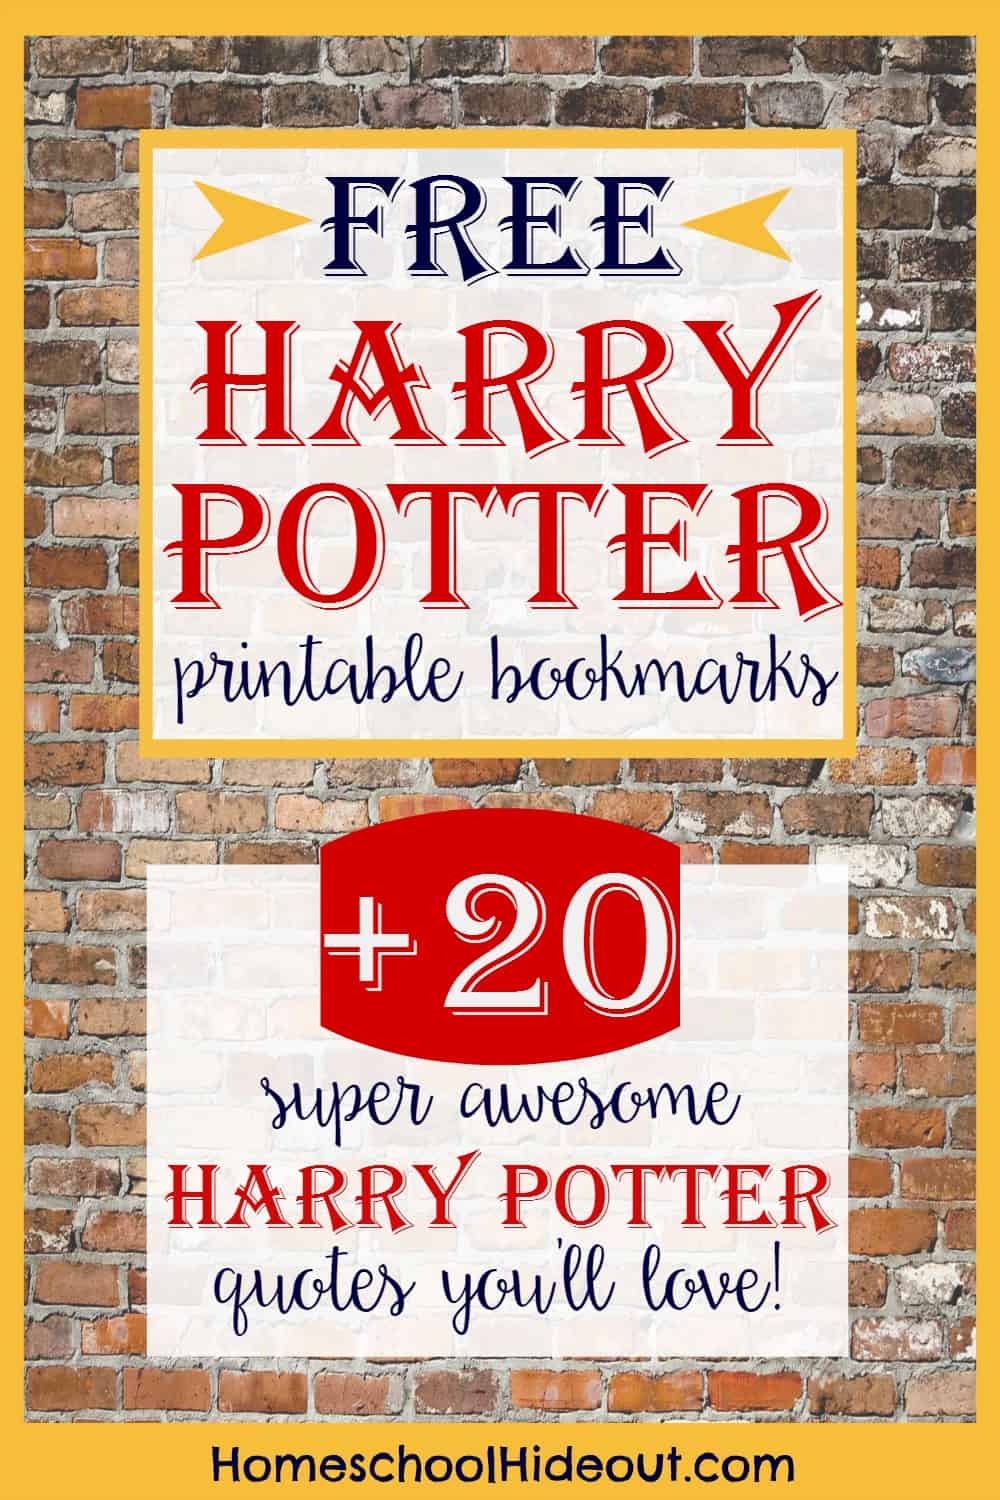 Free printable Harry Potter bookmark + the 20 best HP quotes!